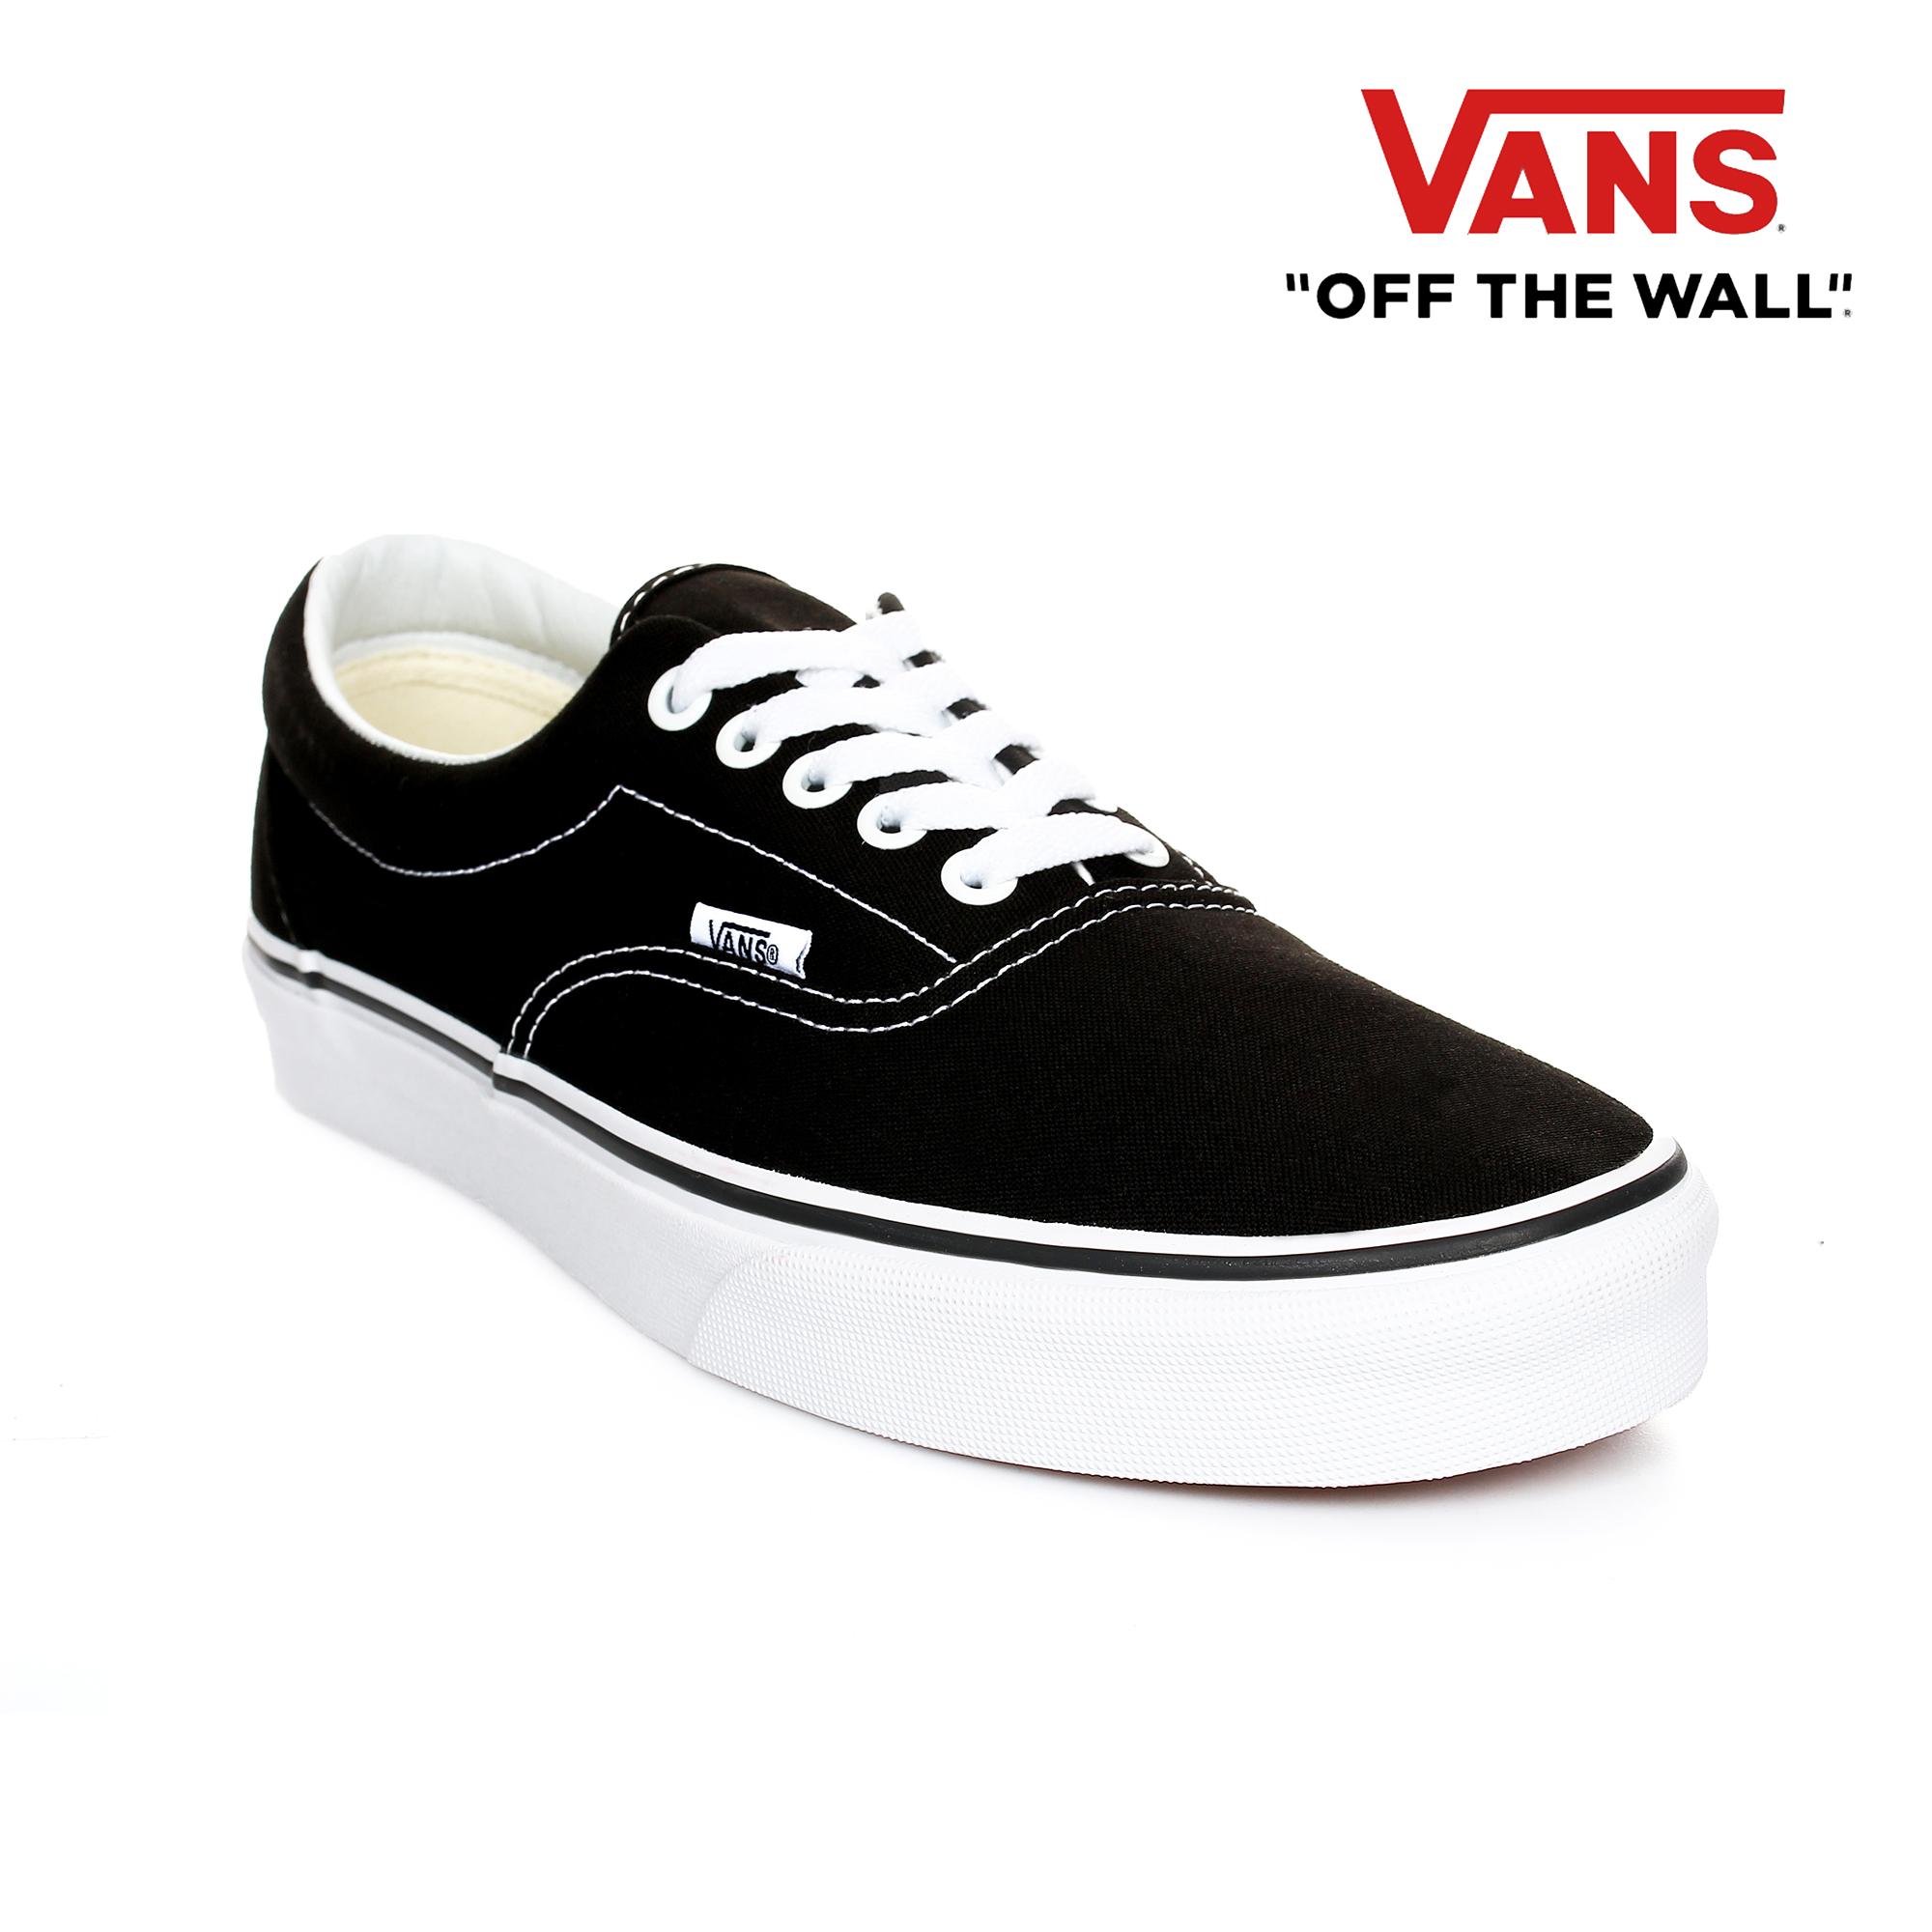 cheapest place to get vans shoes 